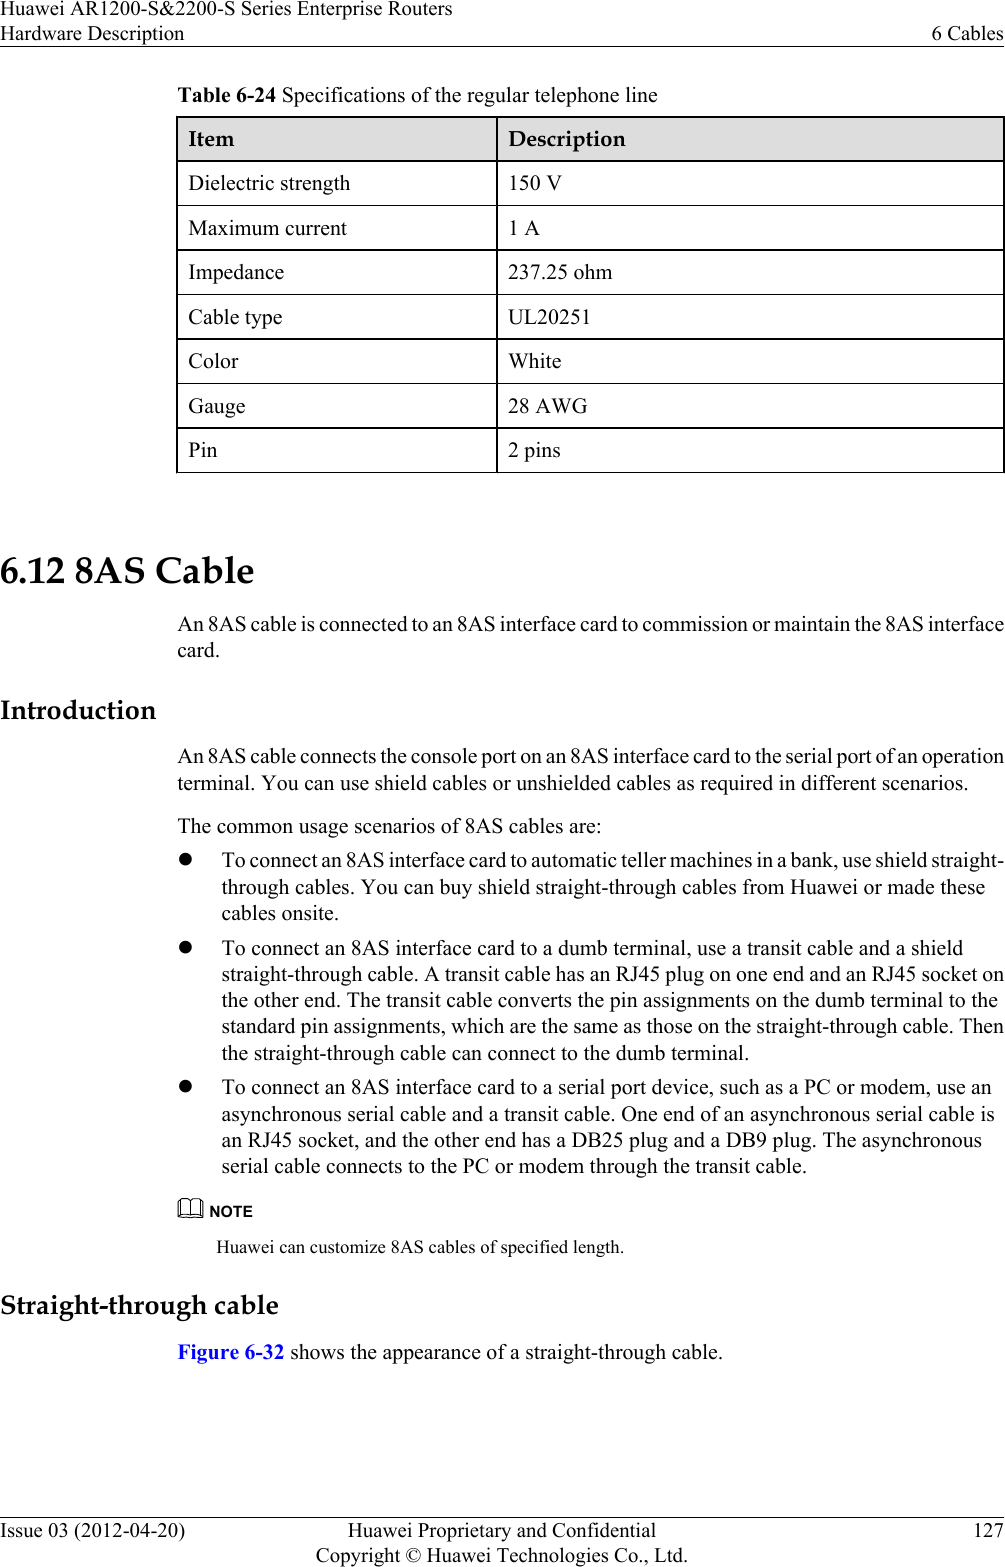 Table 6-24 Specifications of the regular telephone lineItem DescriptionDielectric strength 150 VMaximum current 1 AImpedance 237.25 ohmCable type UL20251Color WhiteGauge 28 AWGPin 2 pins 6.12 8AS CableAn 8AS cable is connected to an 8AS interface card to commission or maintain the 8AS interfacecard.IntroductionAn 8AS cable connects the console port on an 8AS interface card to the serial port of an operationterminal. You can use shield cables or unshielded cables as required in different scenarios.The common usage scenarios of 8AS cables are:lTo connect an 8AS interface card to automatic teller machines in a bank, use shield straight-through cables. You can buy shield straight-through cables from Huawei or made thesecables onsite.lTo connect an 8AS interface card to a dumb terminal, use a transit cable and a shieldstraight-through cable. A transit cable has an RJ45 plug on one end and an RJ45 socket onthe other end. The transit cable converts the pin assignments on the dumb terminal to thestandard pin assignments, which are the same as those on the straight-through cable. Thenthe straight-through cable can connect to the dumb terminal.lTo connect an 8AS interface card to a serial port device, such as a PC or modem, use anasynchronous serial cable and a transit cable. One end of an asynchronous serial cable isan RJ45 socket, and the other end has a DB25 plug and a DB9 plug. The asynchronousserial cable connects to the PC or modem through the transit cable.NOTEHuawei can customize 8AS cables of specified length.Straight-through cableFigure 6-32 shows the appearance of a straight-through cable.Huawei AR1200-S&amp;2200-S Series Enterprise RoutersHardware Description 6 CablesIssue 03 (2012-04-20) Huawei Proprietary and ConfidentialCopyright © Huawei Technologies Co., Ltd.127